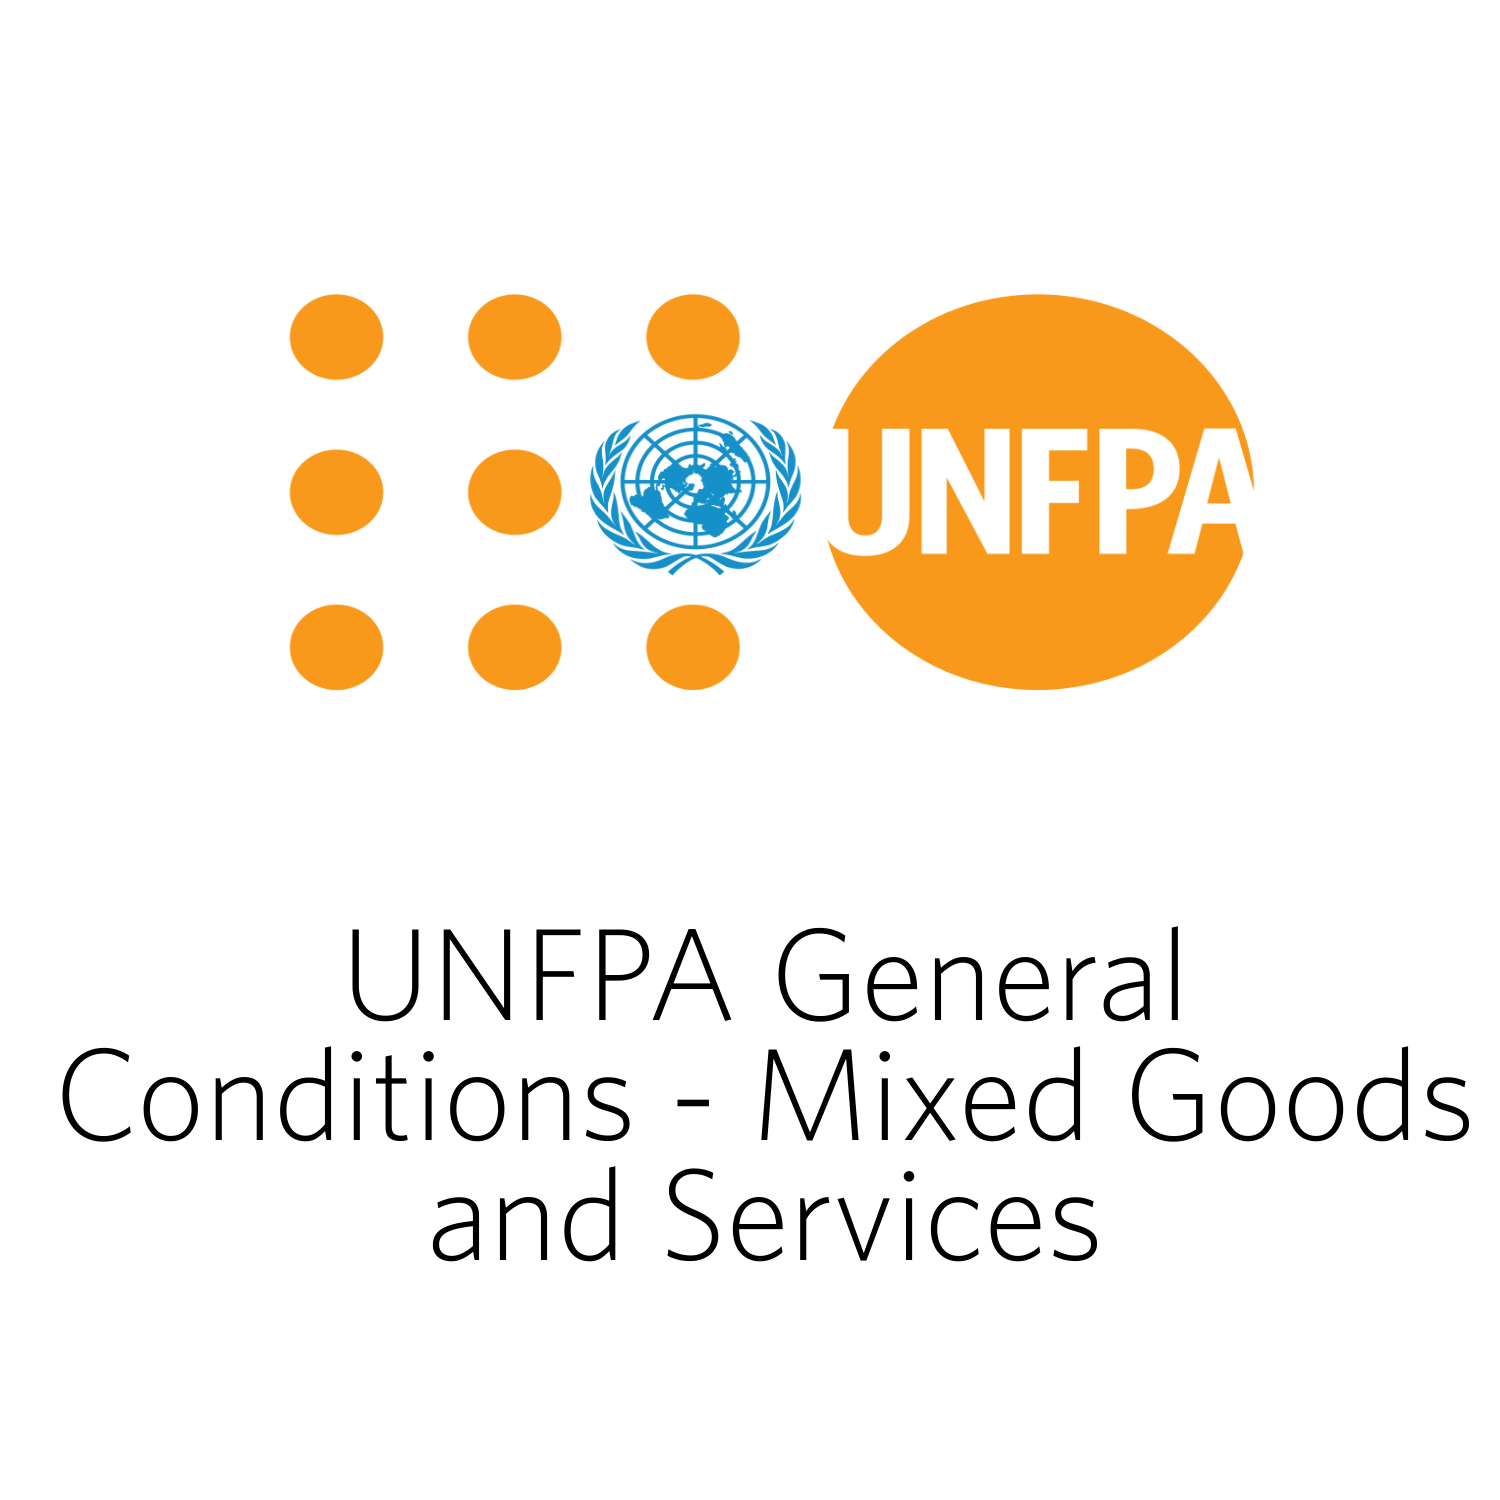 UNFPA General Conditions - Mixed Goods and Services